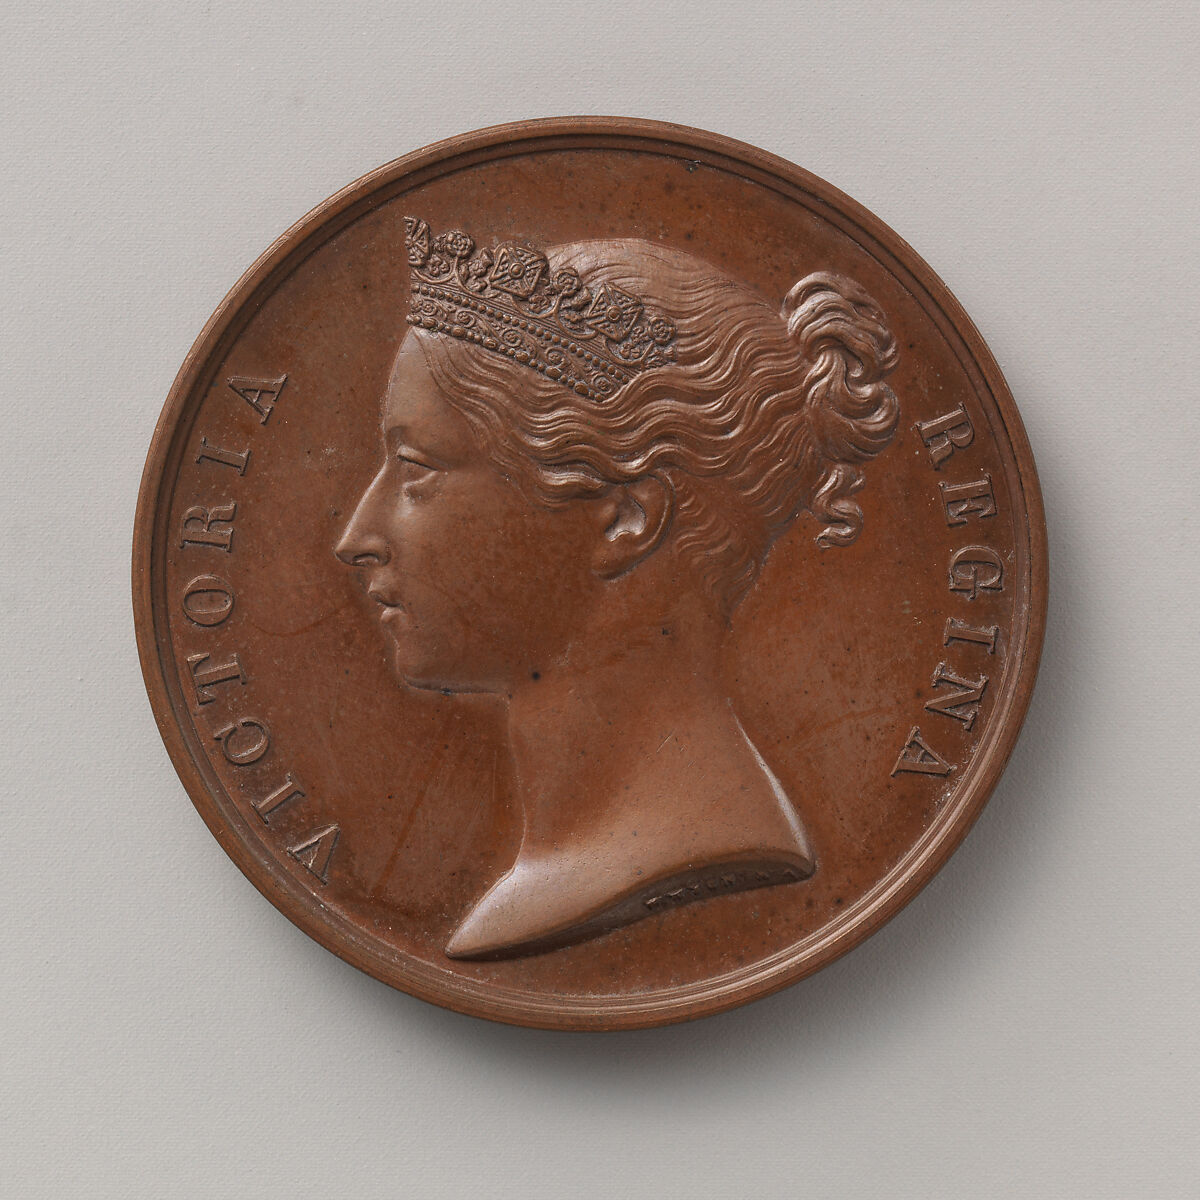 The Burmah Medal (1852–55), granted by the government of India, and now generally known as the Indian Medal, Medalist (obverse): William Wyon (British, Birmingham 1795–1851 Brighton), Bronze, British 